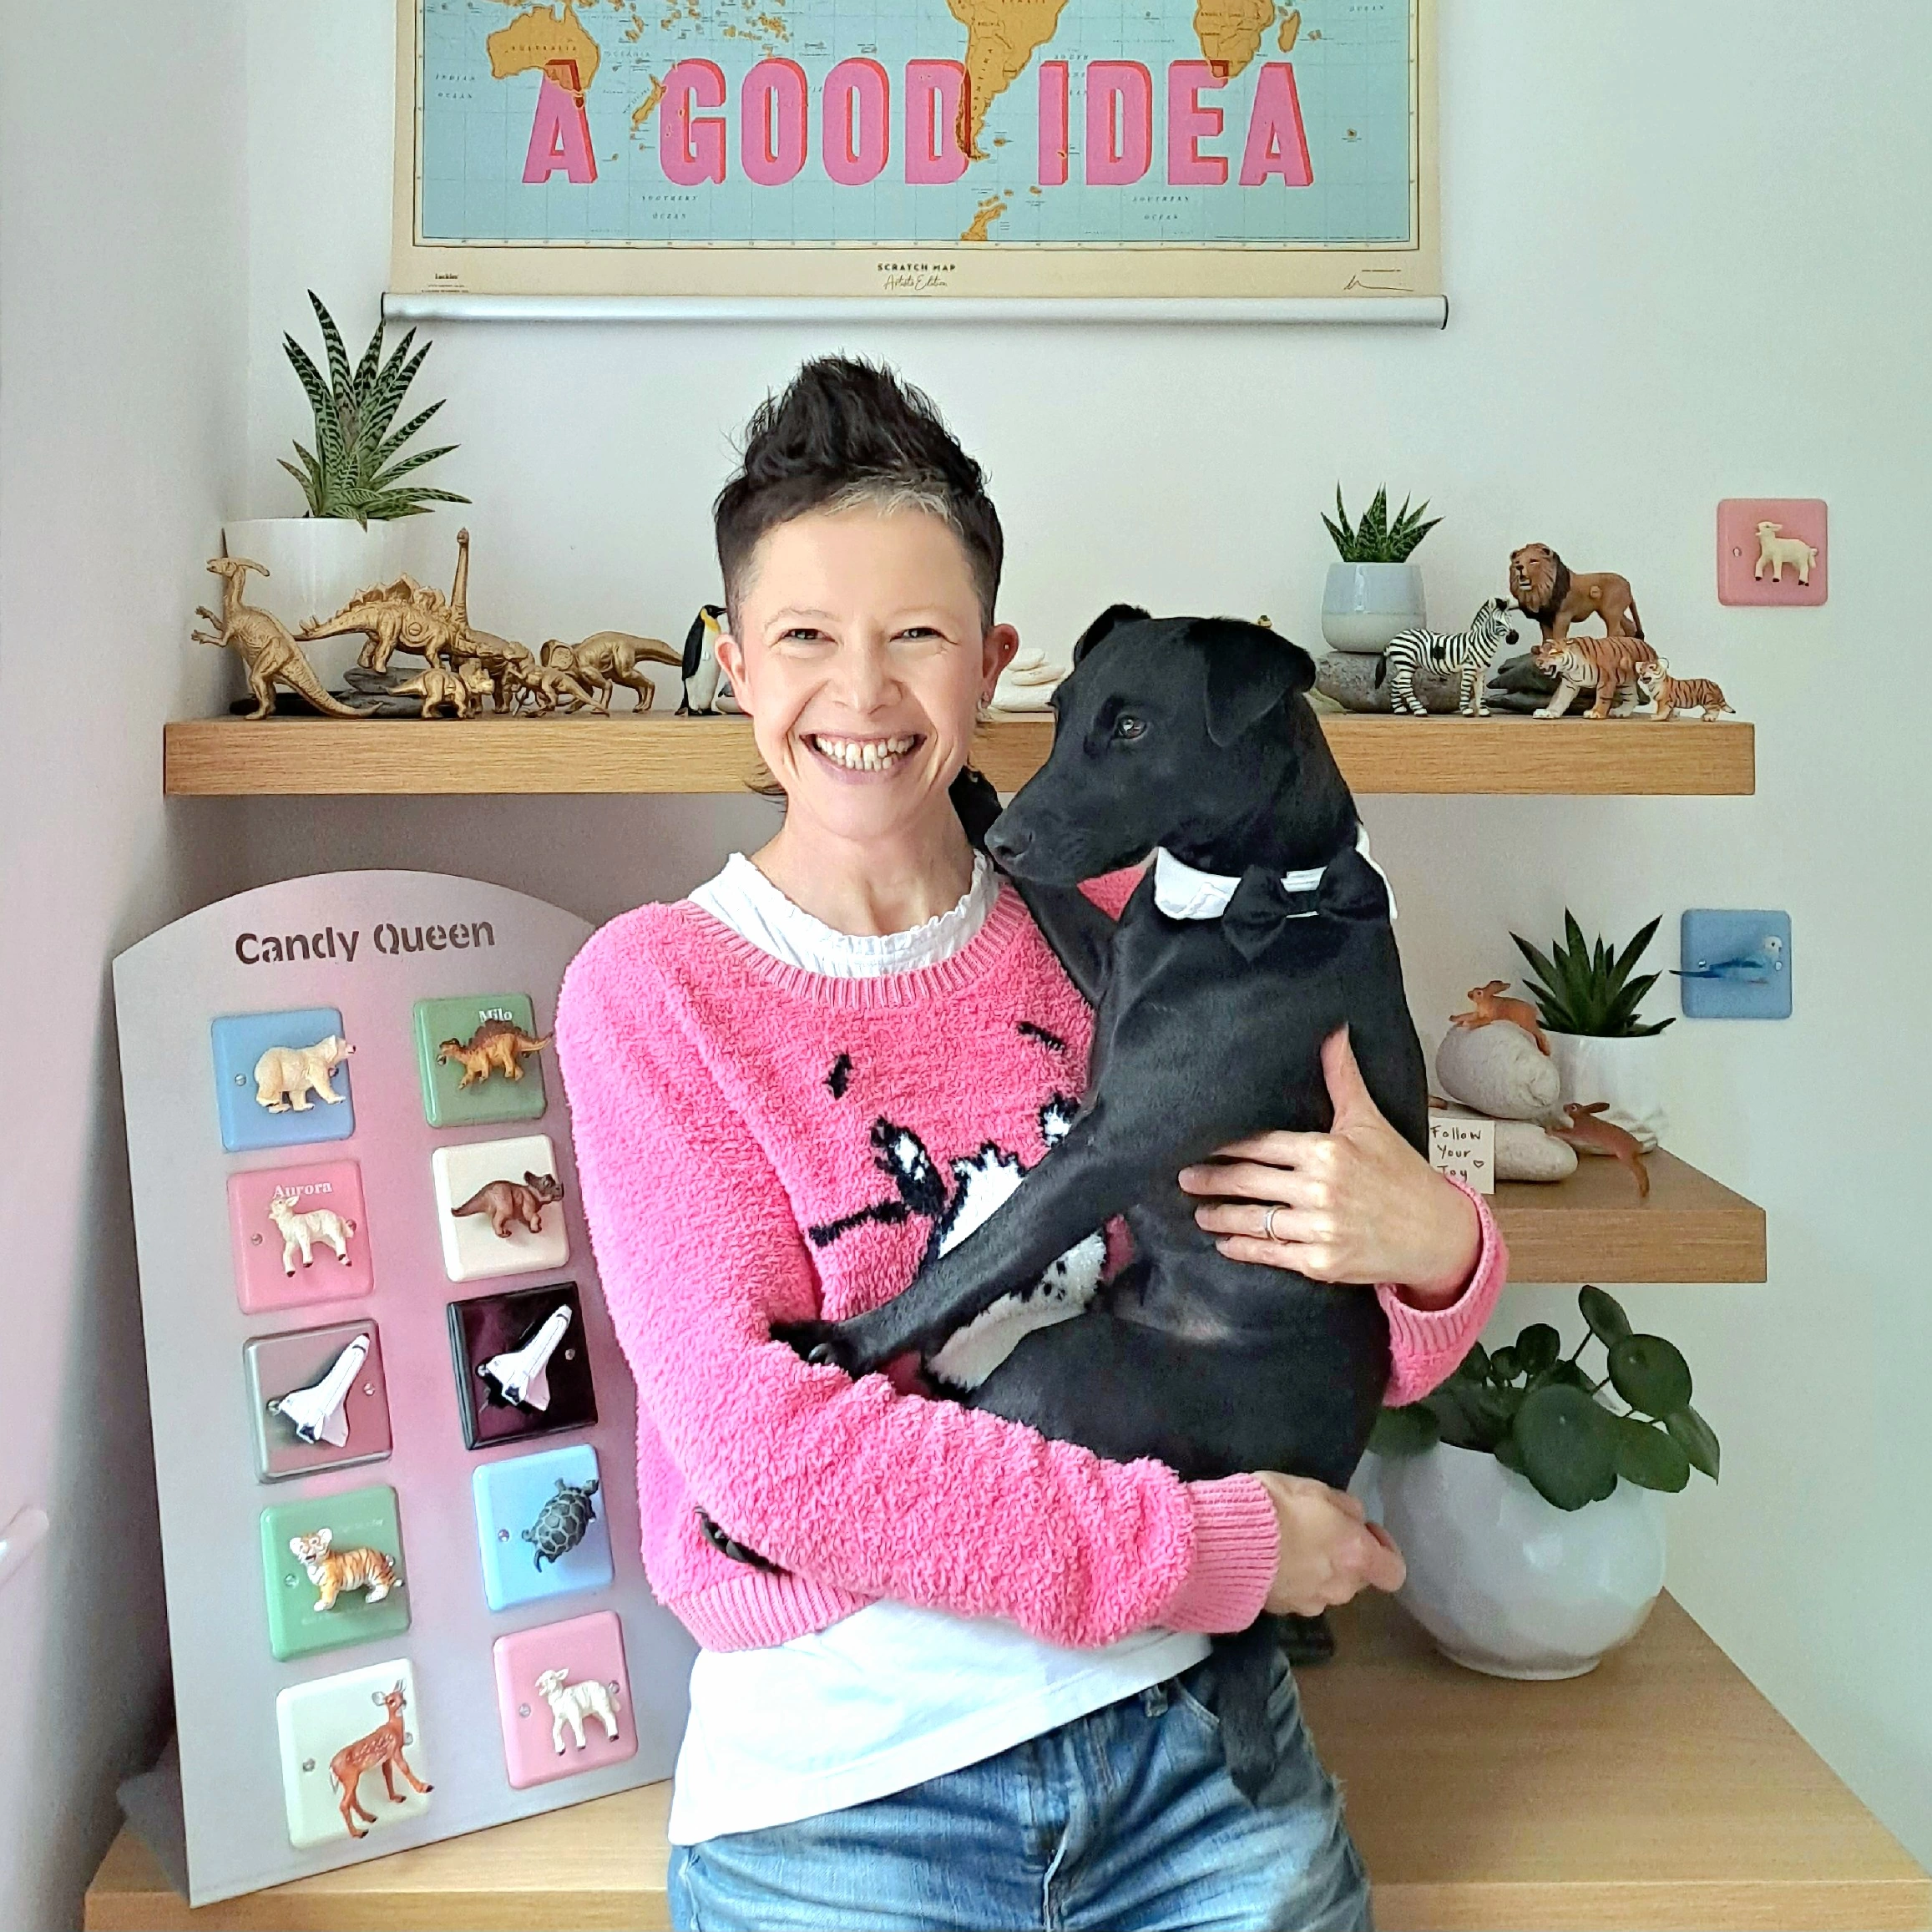 A white female known as The Candy Queen stands in front of a laminated oak desk, to her left is a stainless steel stand with Candy Queen laser cut out of it, the stand holds 10 dimmer switches in retro pastel colours with animals on. The Candy Queen wears a pink Care Bear jumper, white blouse and denim shorts, she is holding three light switches in one hand and five animal knows in the other, she is wearing heart shaped dark black rimmed sunglasses and is grinning. On the shelf behind her are rows of animal knows and house plants in white plant pots.